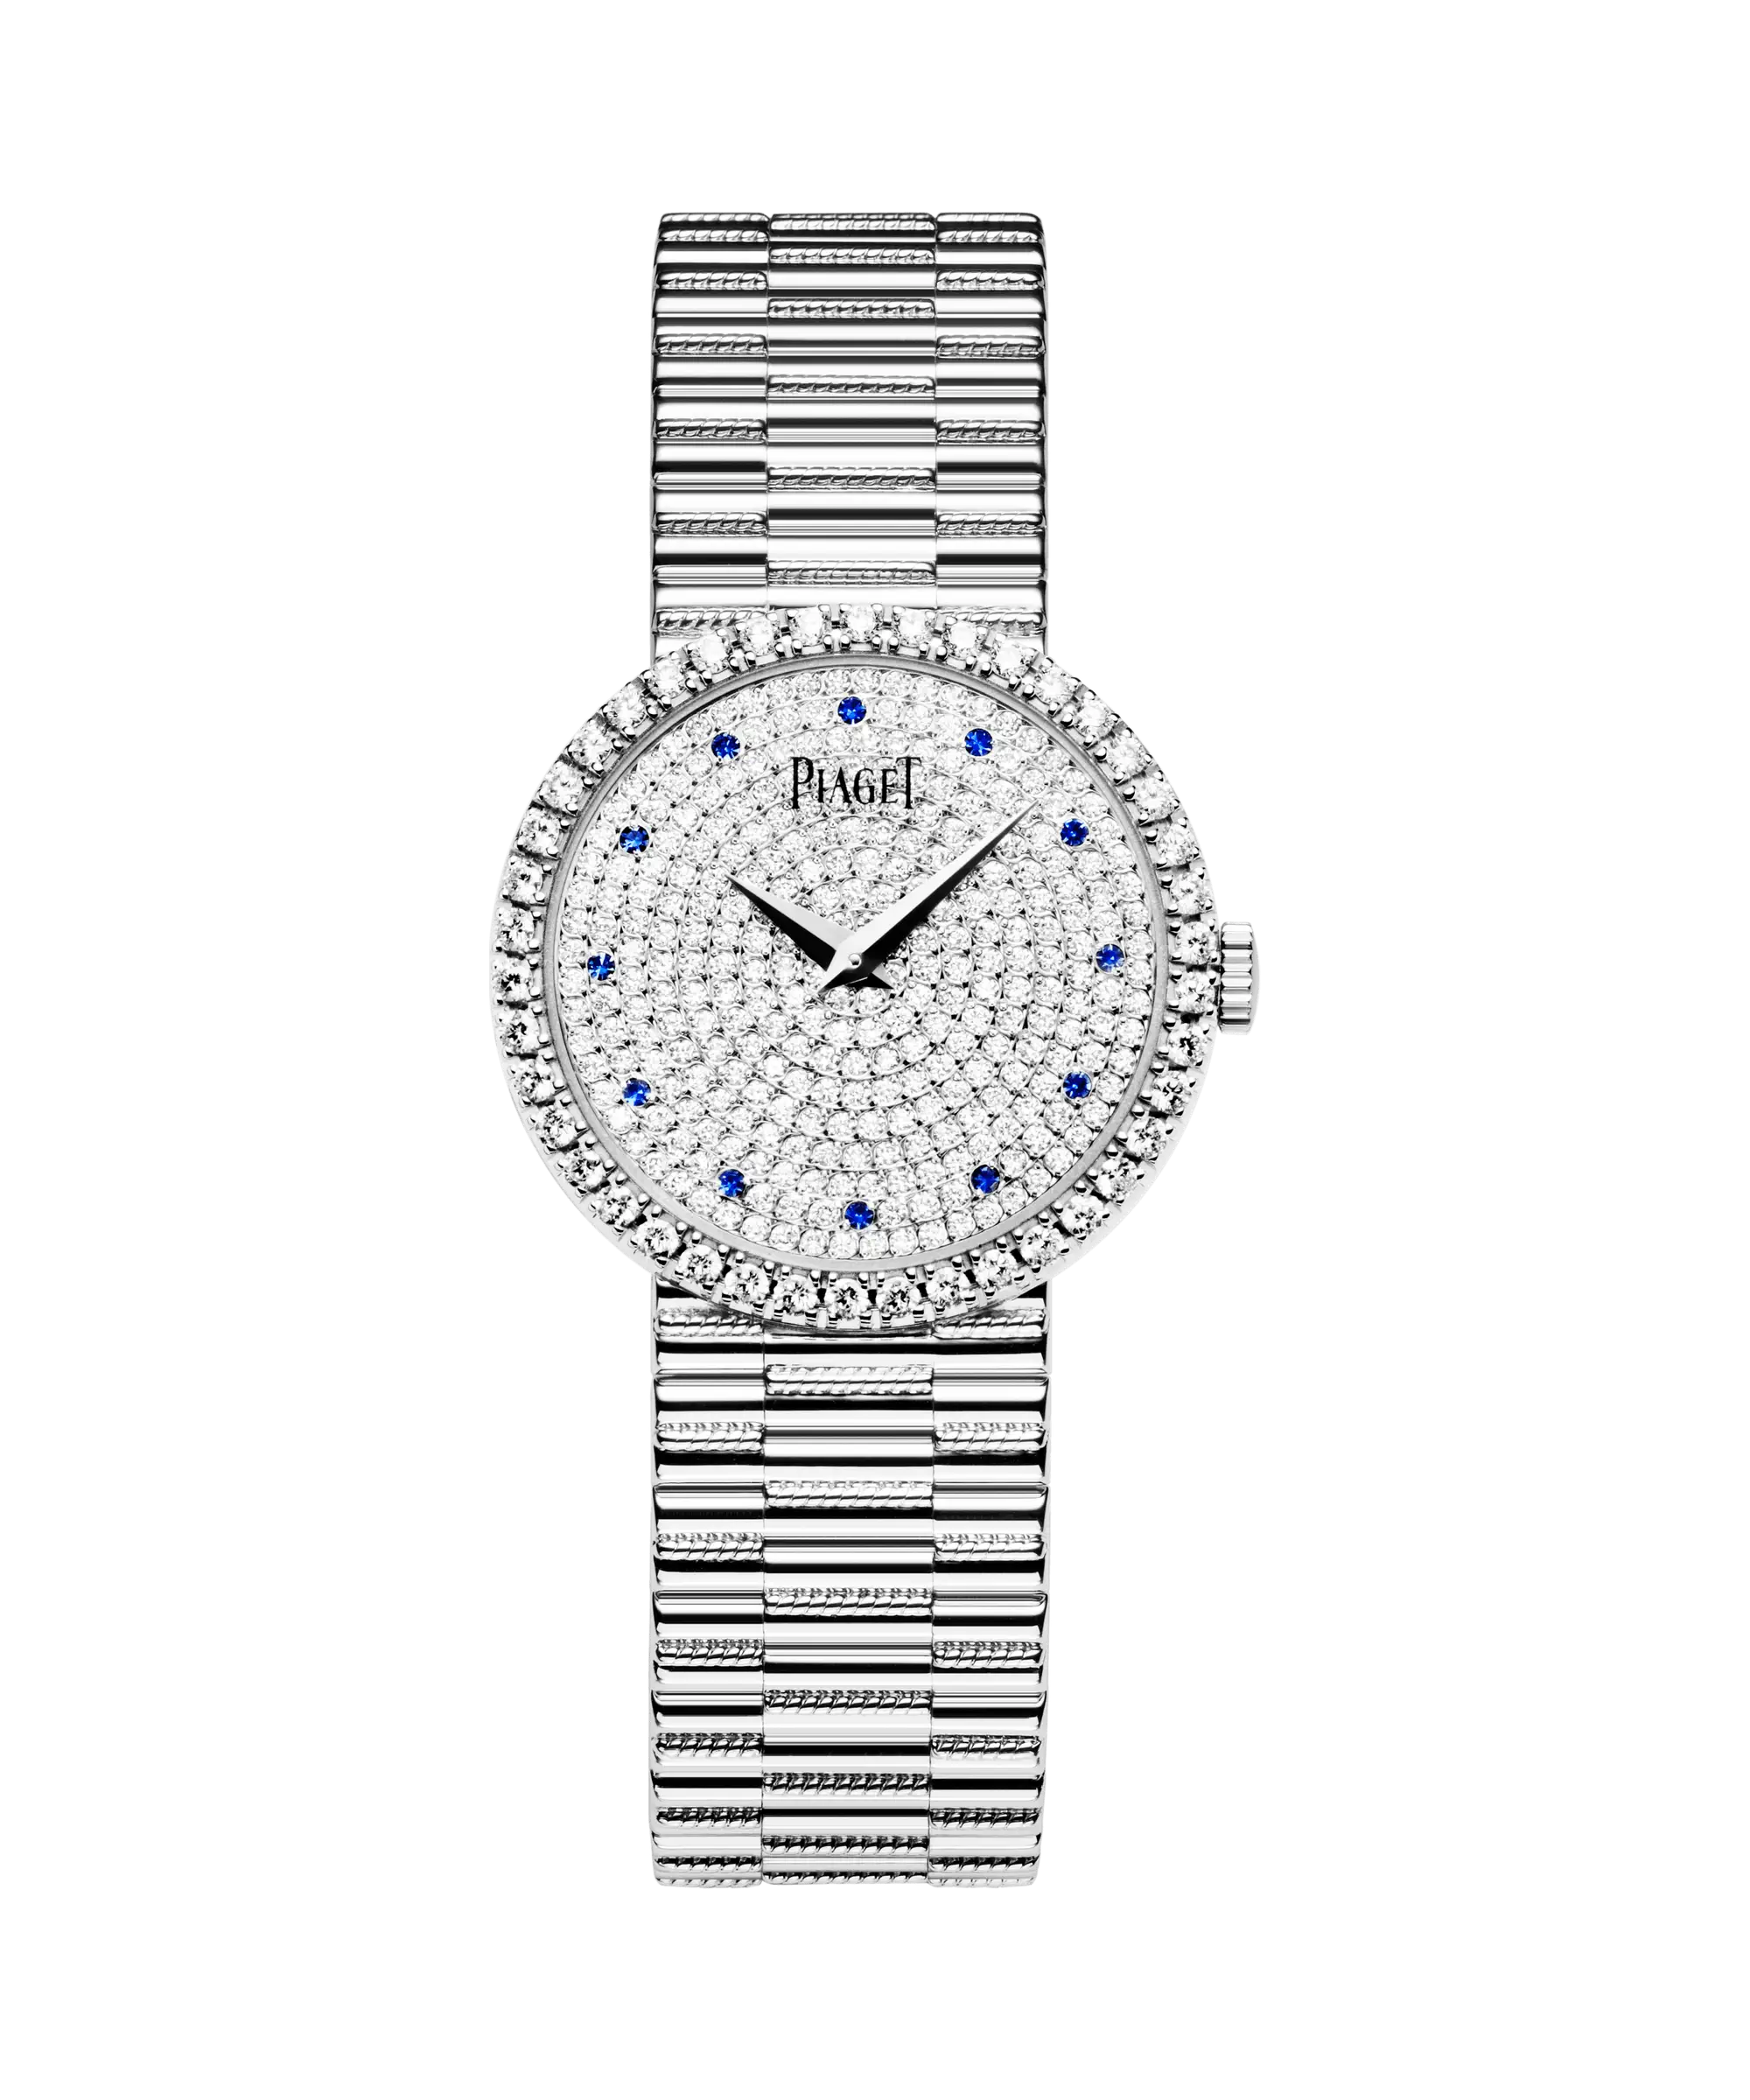 Piaget Traditional-exchage-image